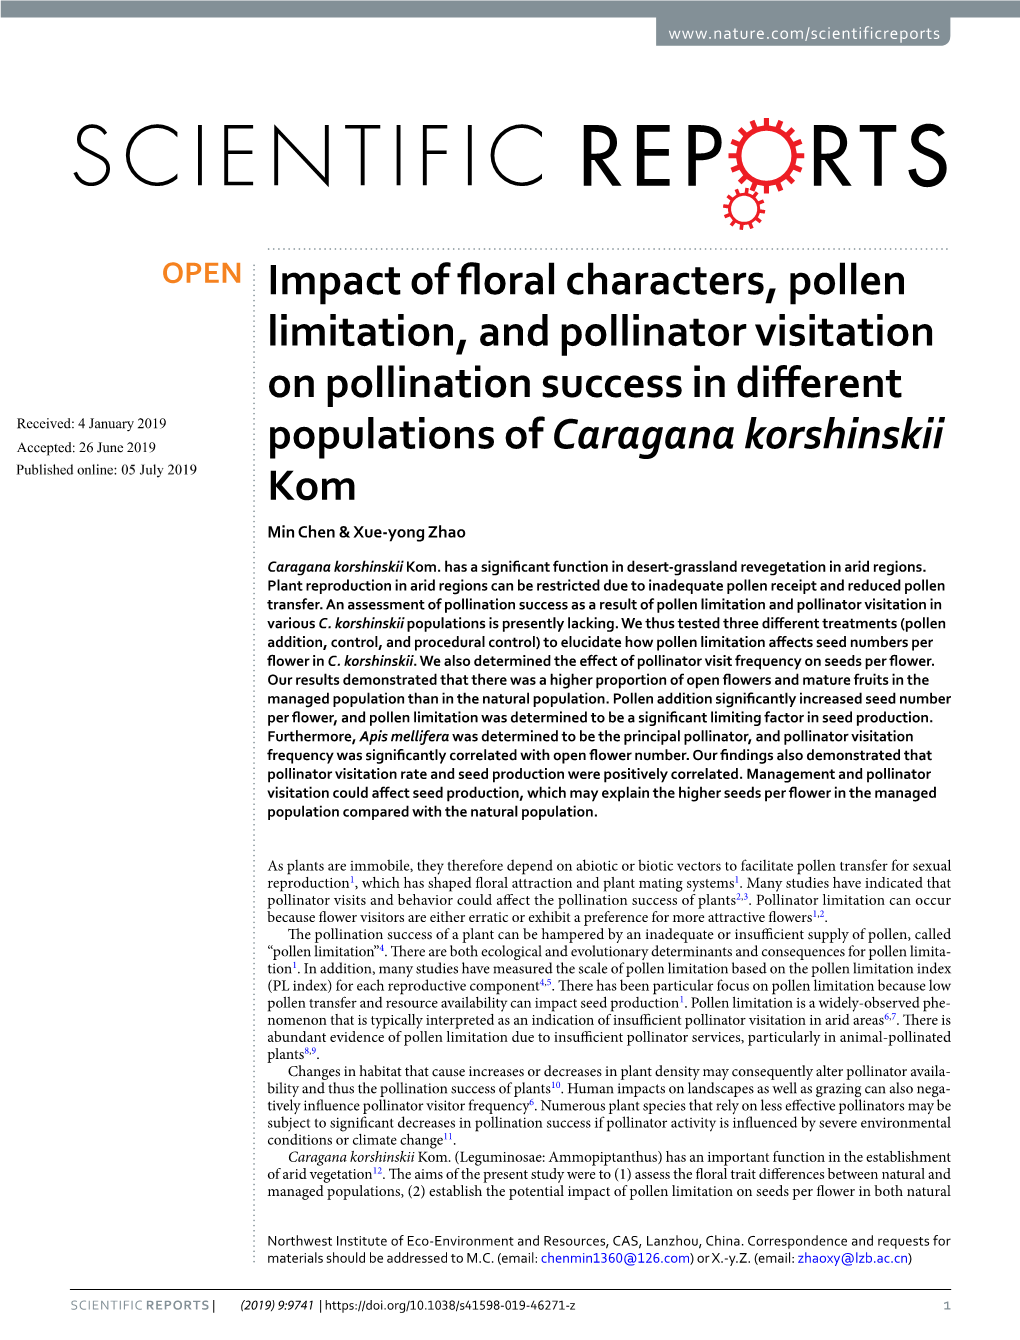 Impact of Floral Characters, Pollen Limitation, and Pollinator Visitation